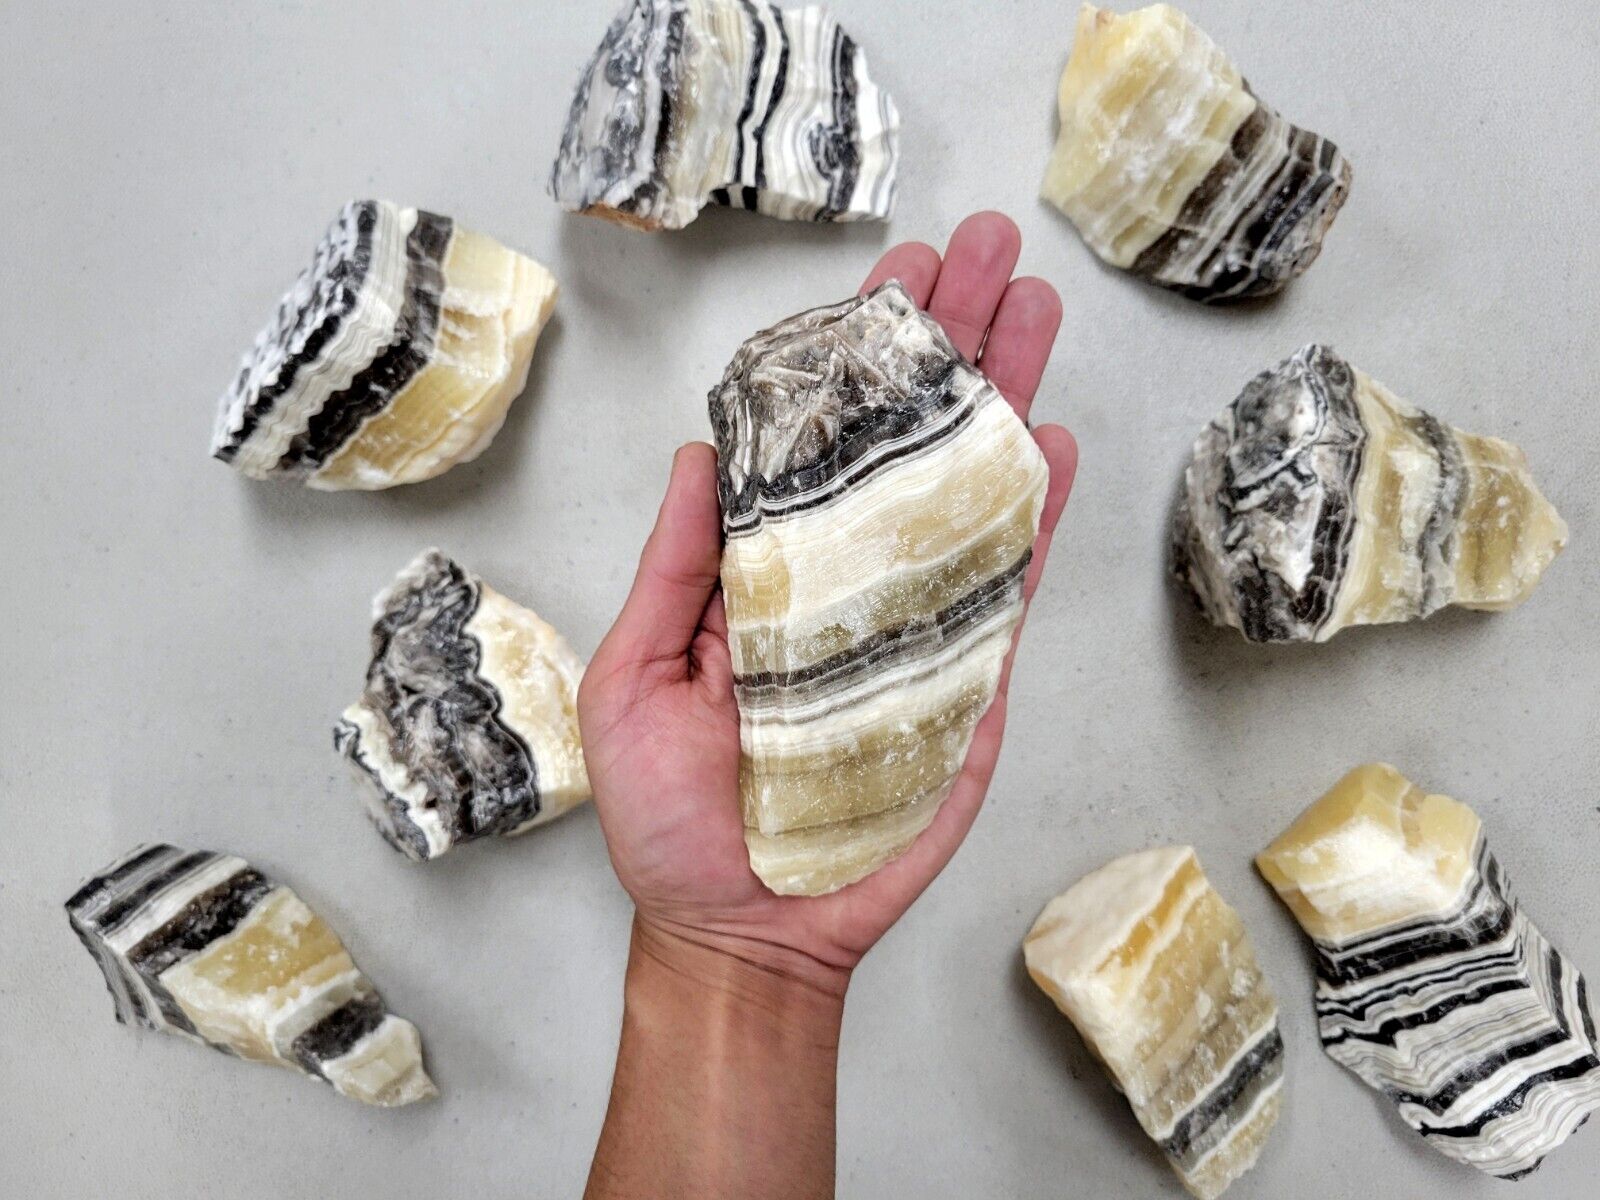 Large Zebra Calcite Crystal Slabs from Mexico for Lapidary Healing & Display